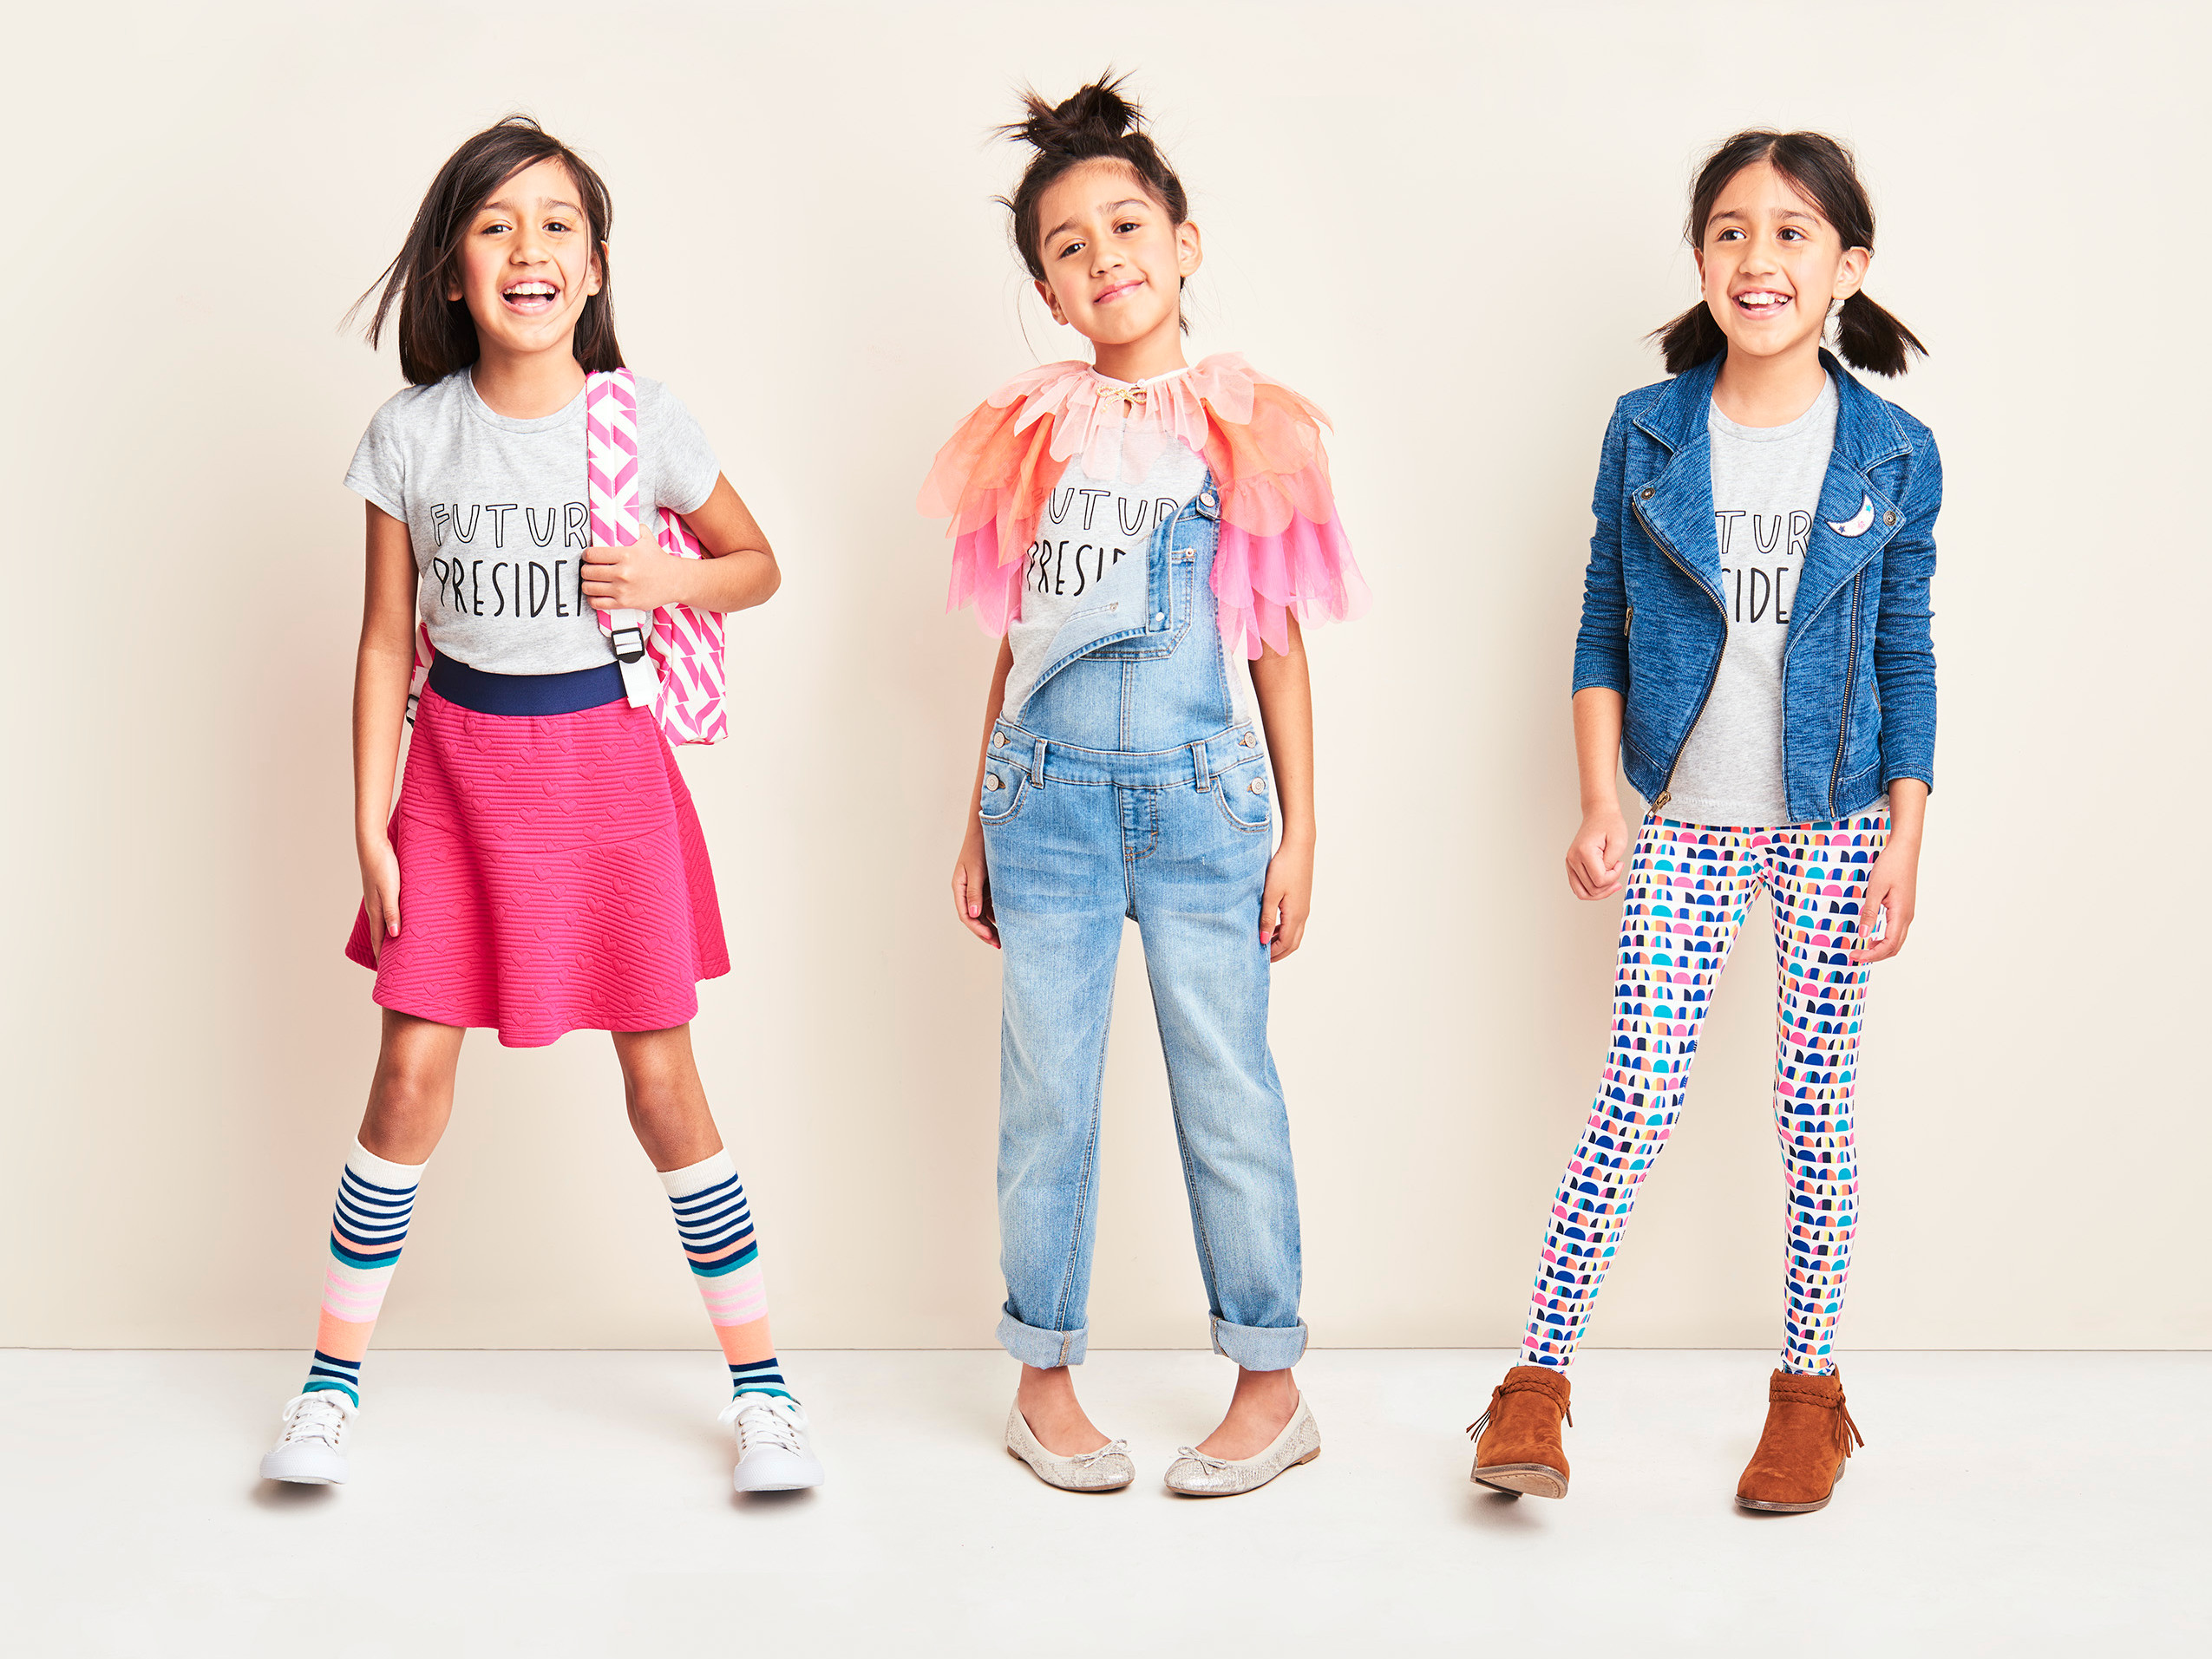 Kids Fashion Outfits
 Tar is overhauling its kids clothing business